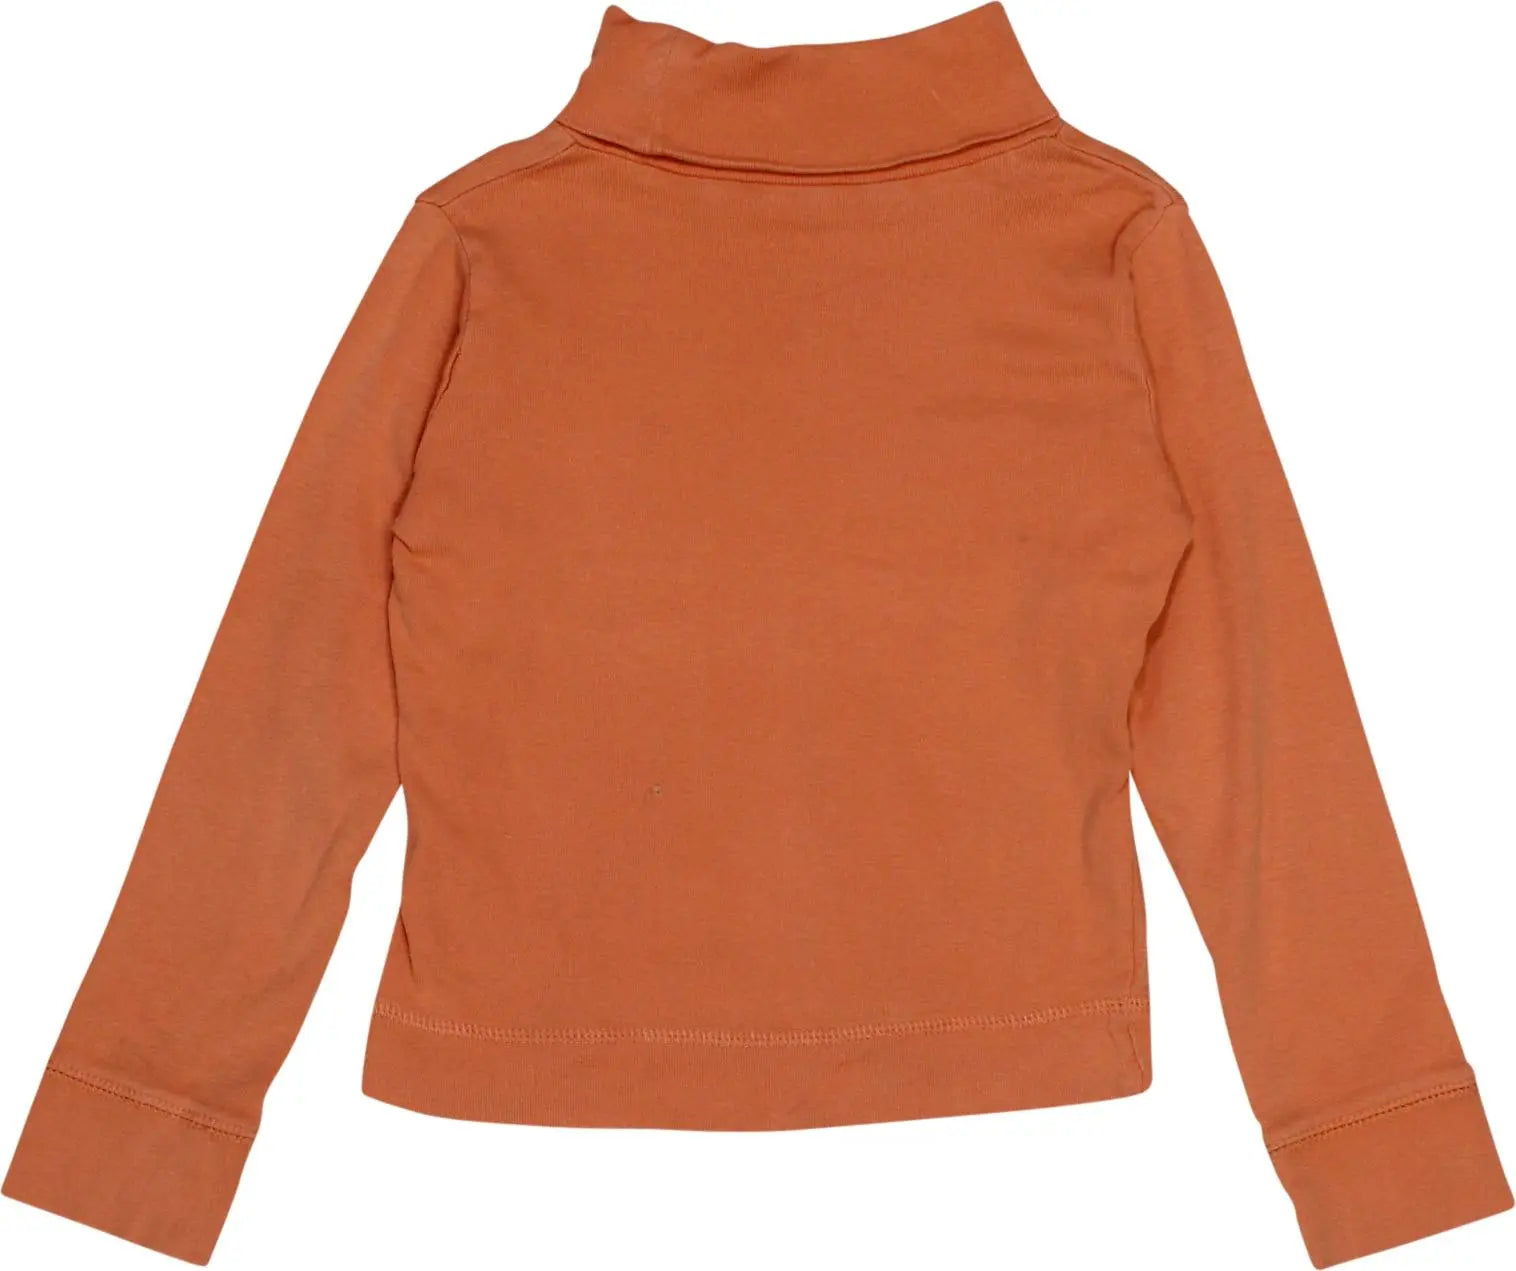 Unknown - Orange Long Sleeve T-shirt- ThriftTale.com - Vintage and second handclothing